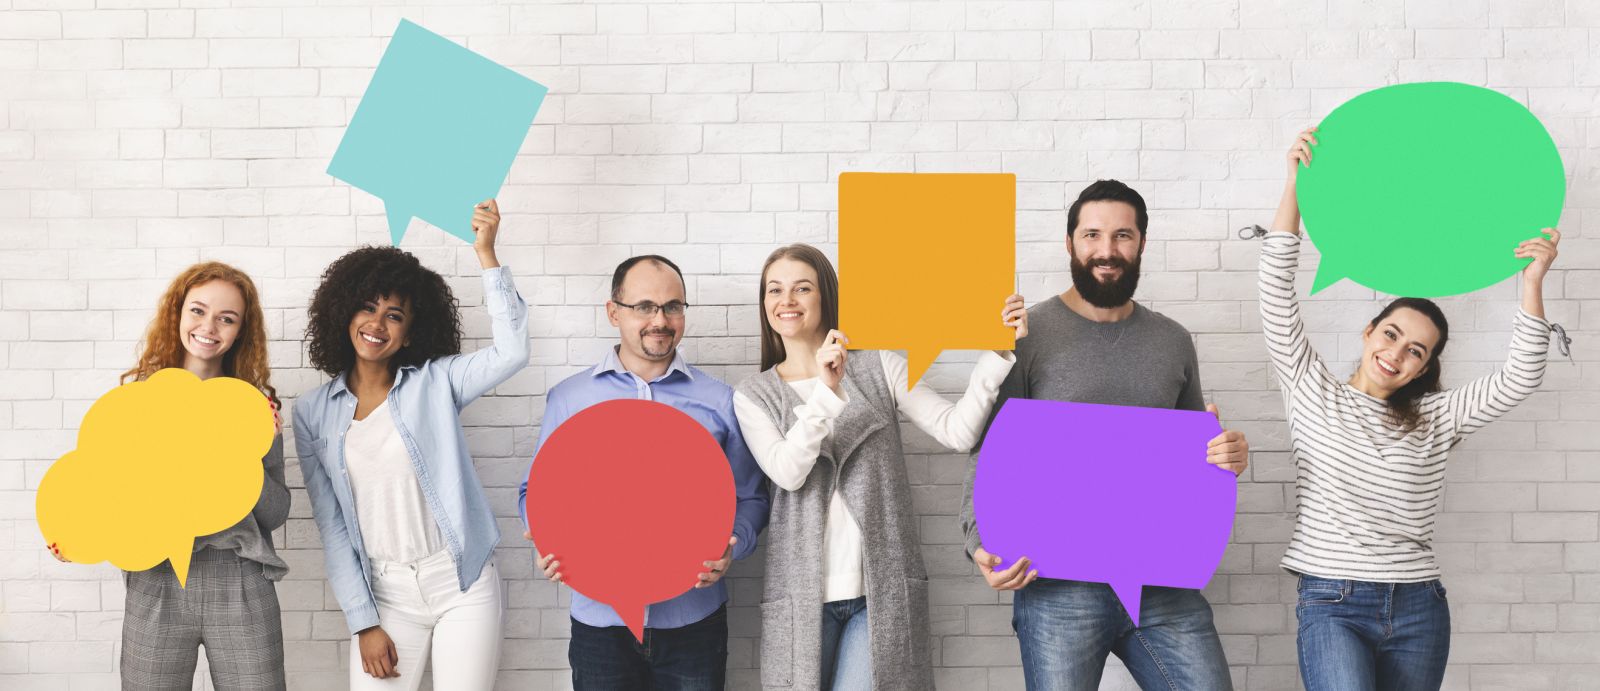 Group of people holding speech bubbles banner image